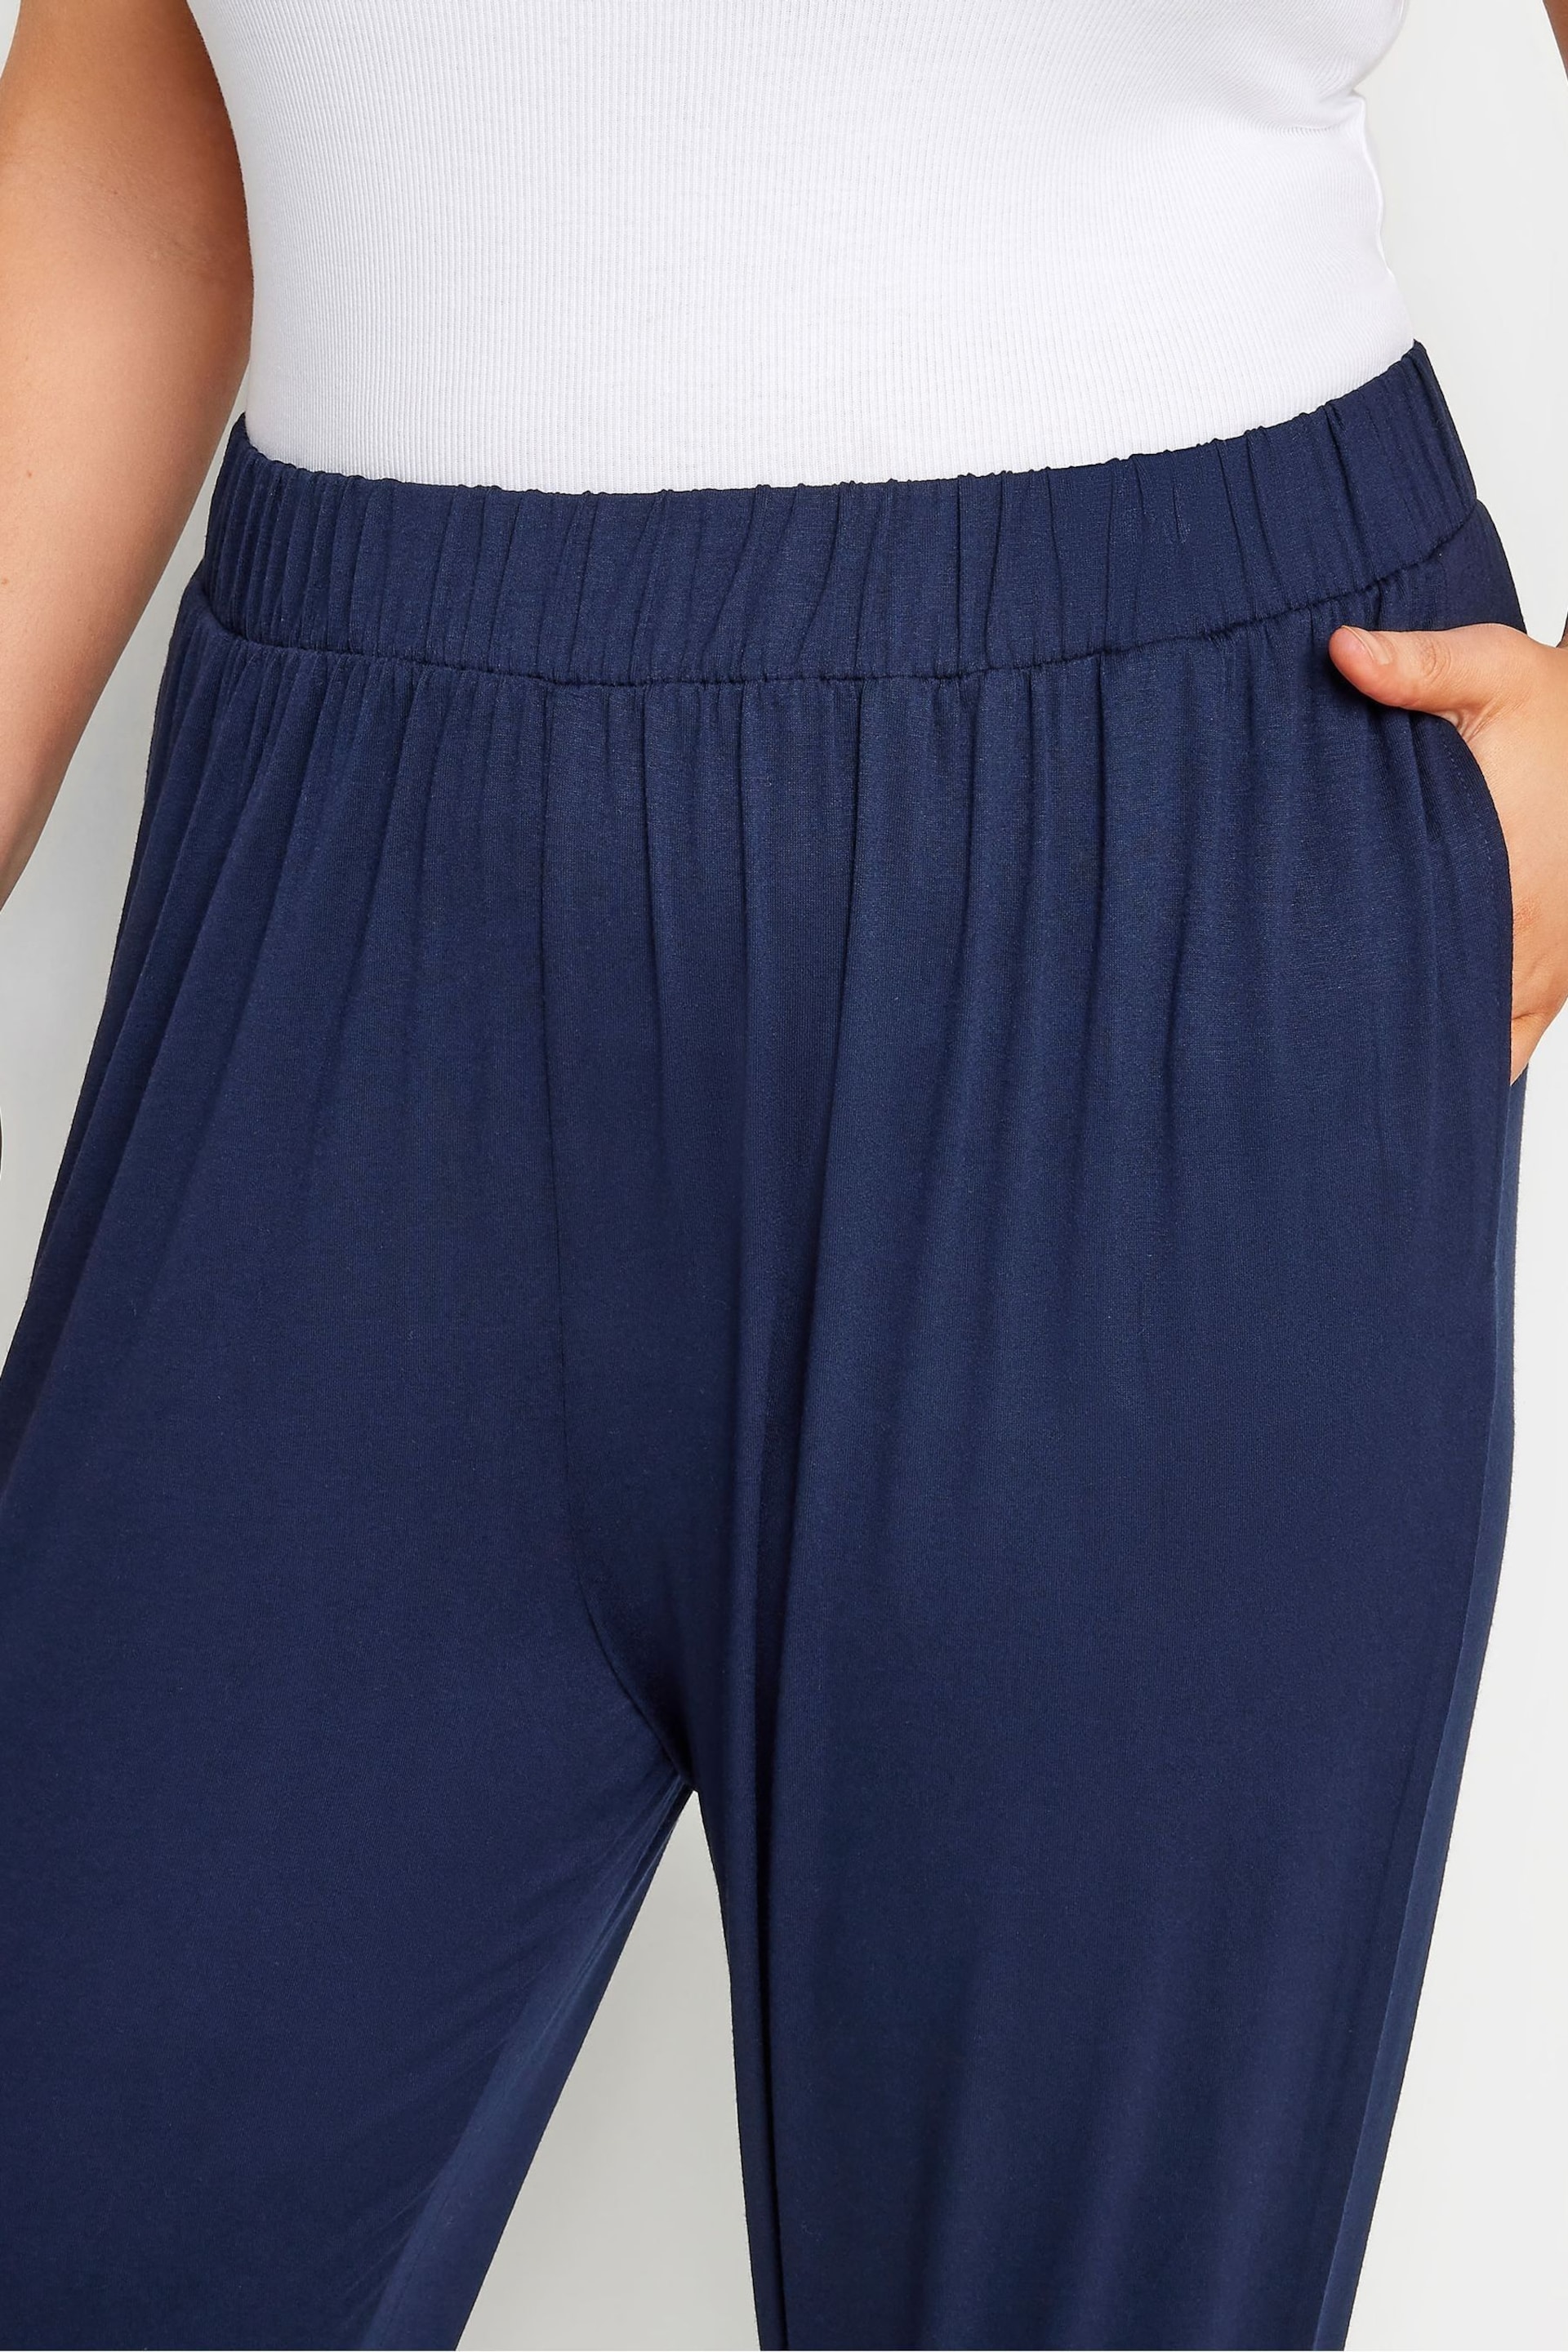 Yours Curve Blue Cropped Harem Trousers - Image 4 of 5